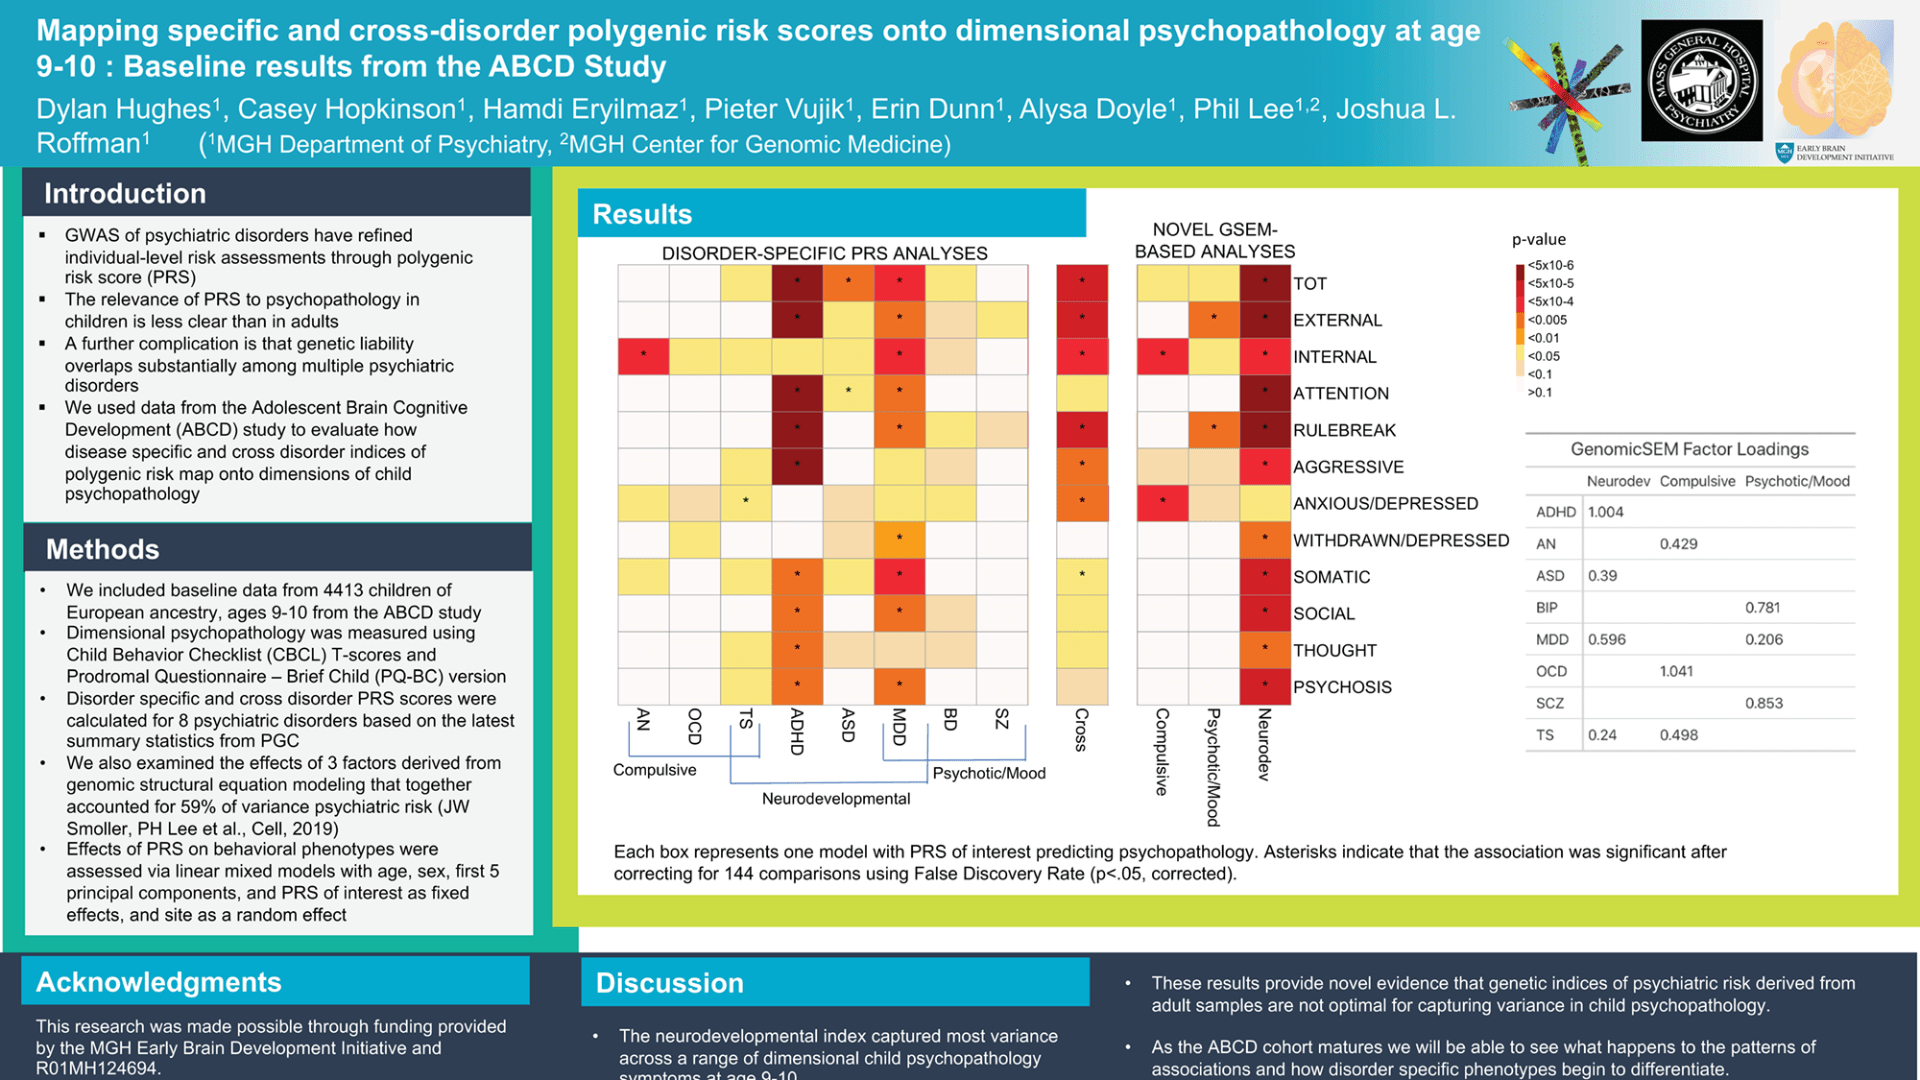 Mapping specific and cross disorder polygenic risk scores onto dimensional psychopathology at age 9-10: Baseline results from the ABCD Study